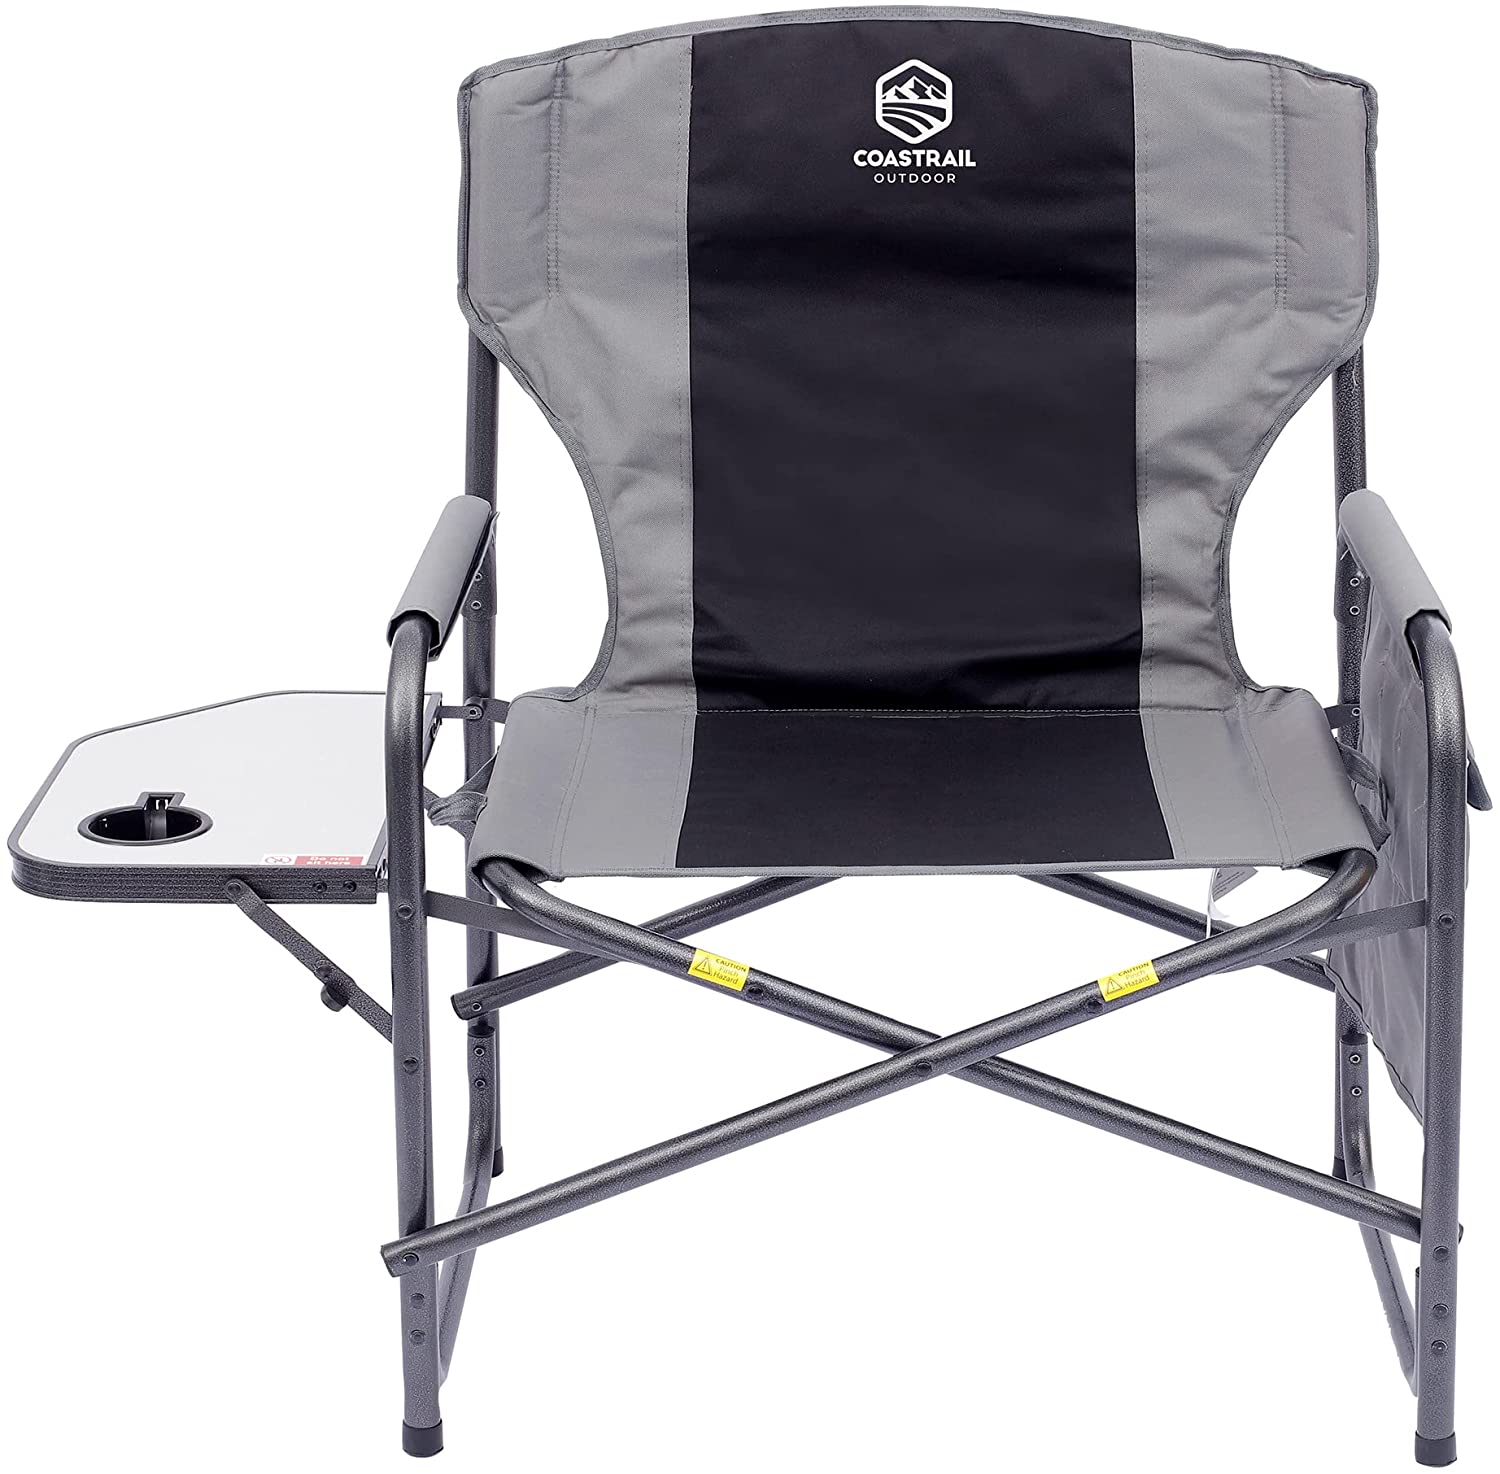 Sports & Outdoors Travel Chair Director Chair Barbecue Stool